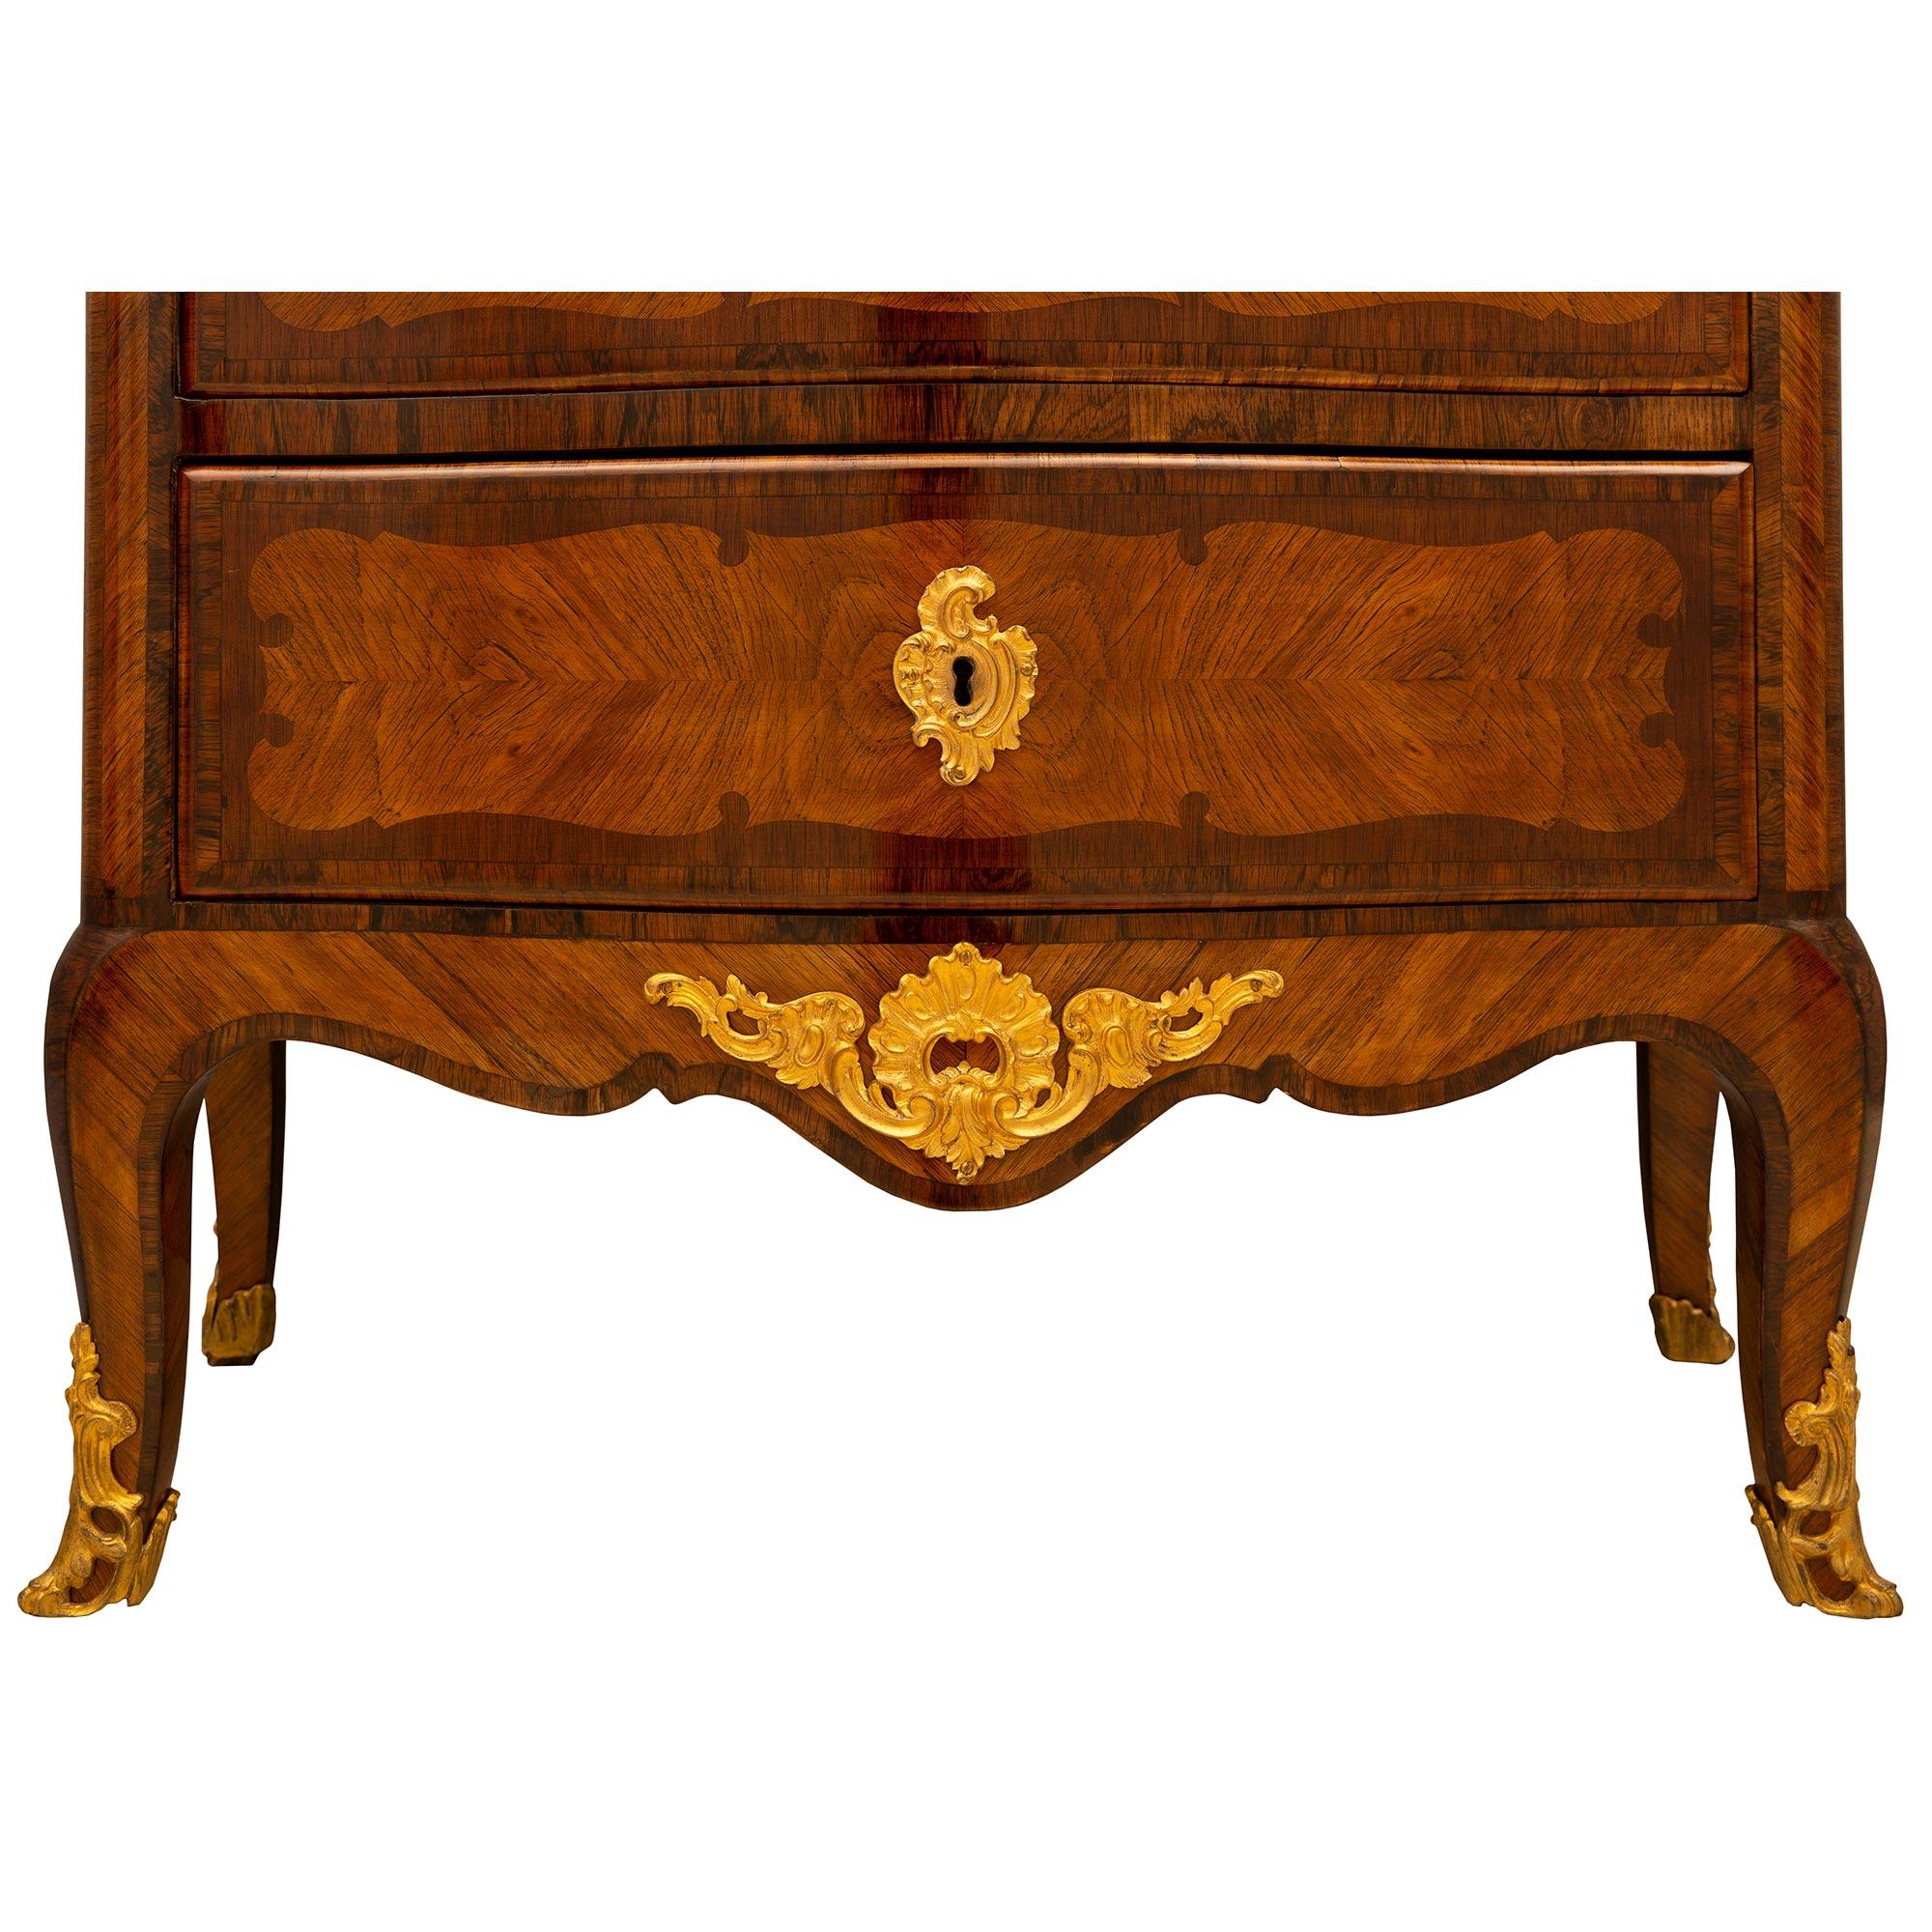 French 19th Century Transitional Style Kingwood and Ormolu Six Drawer Chiffonier For Sale 6